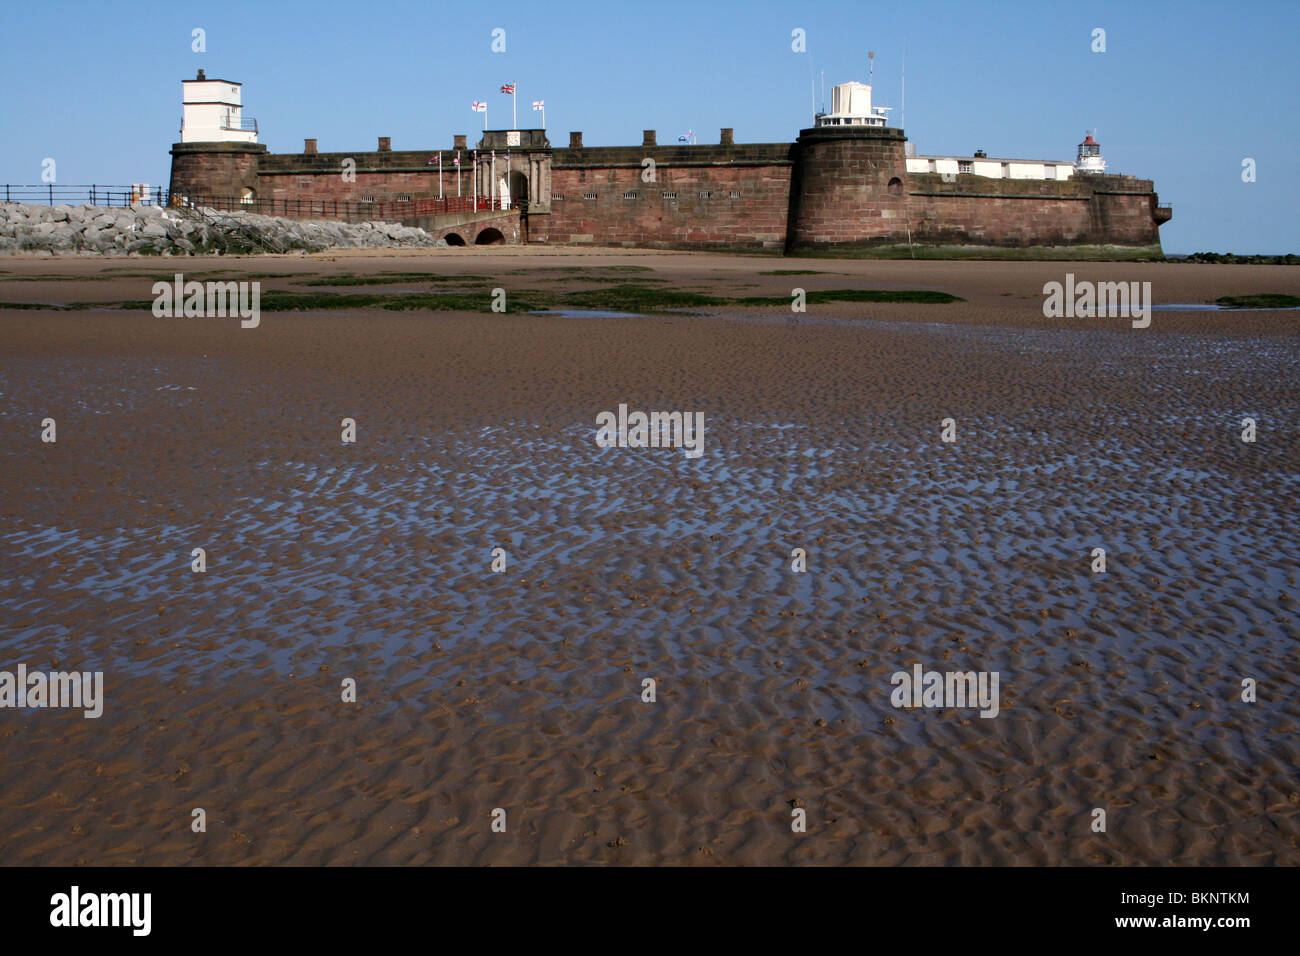 Fort Perchaude Rock à New Brighton, Wallasey, le Wirral, Merseyside, Royaume-Uni Banque D'Images